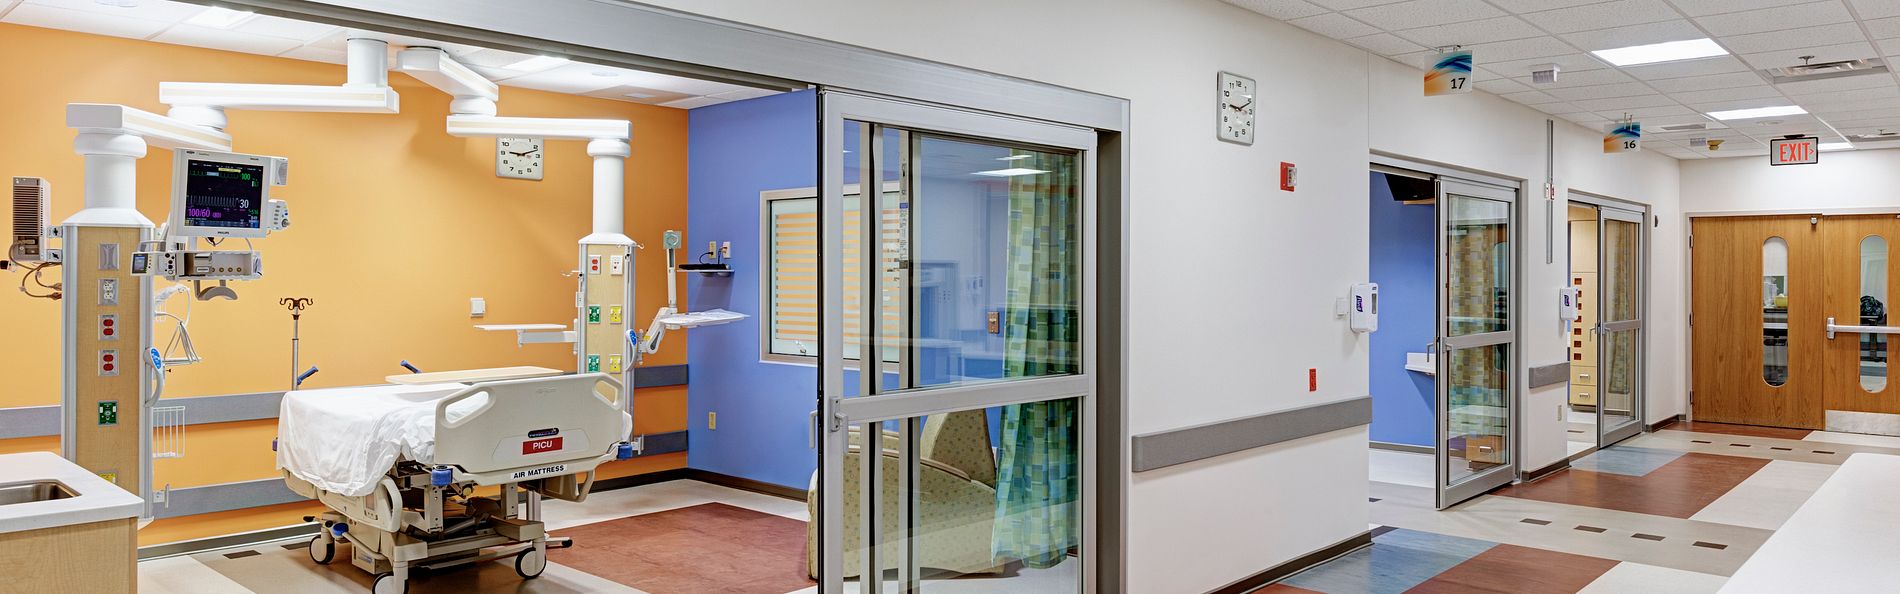 The new rooms were also designed to accommodate isolation of patients if required